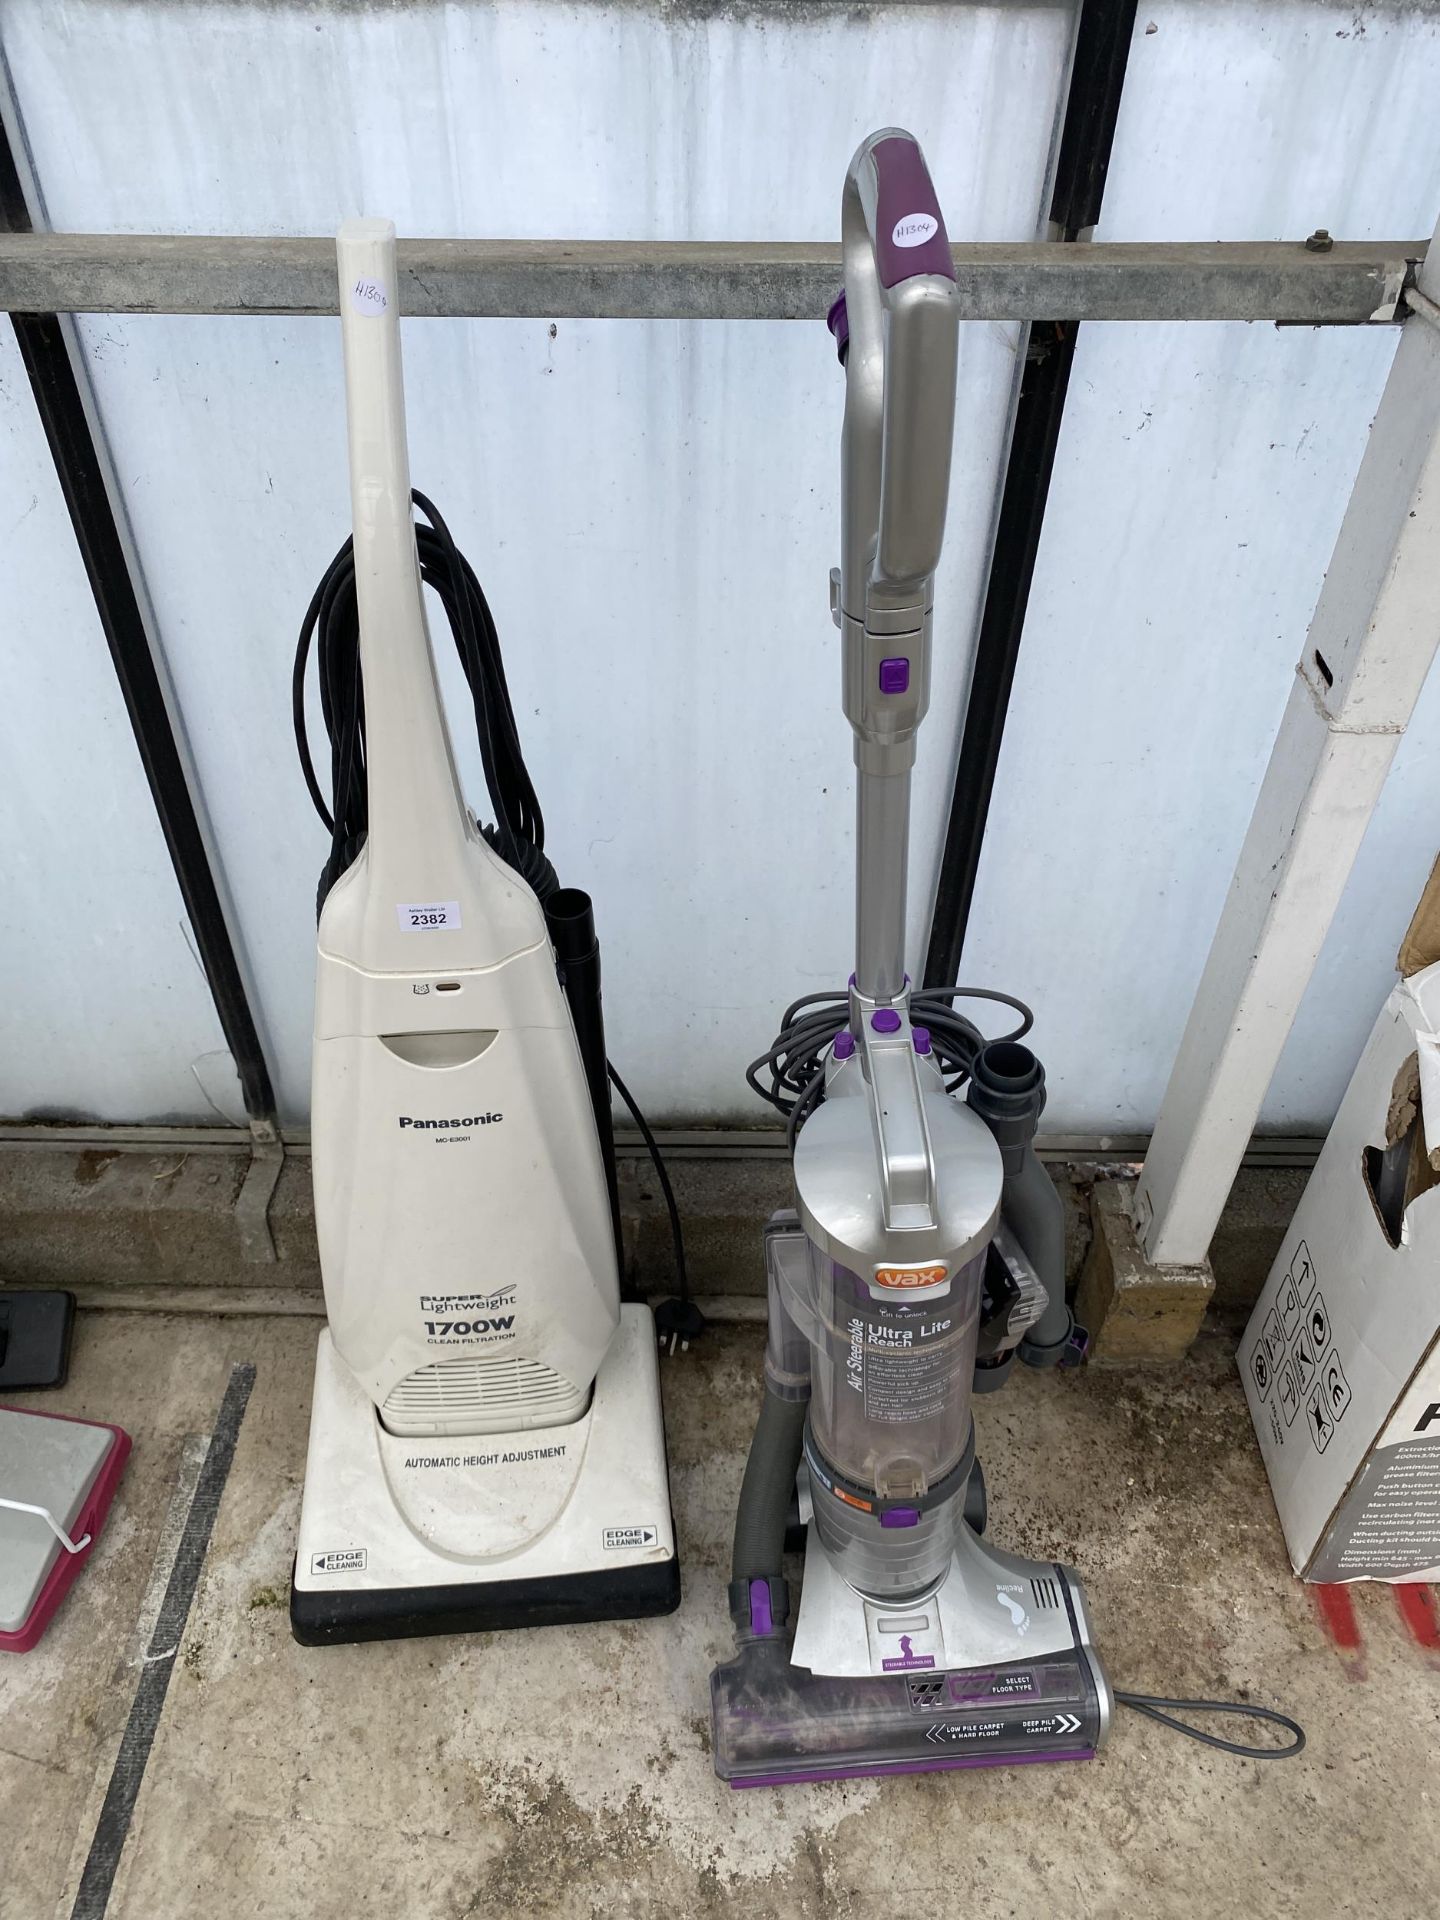 A PANASONIC LIGHTWEIGHT VACUUM CLEANER AND A VAX ULTRA LITE REACH VACUUM CLEANER